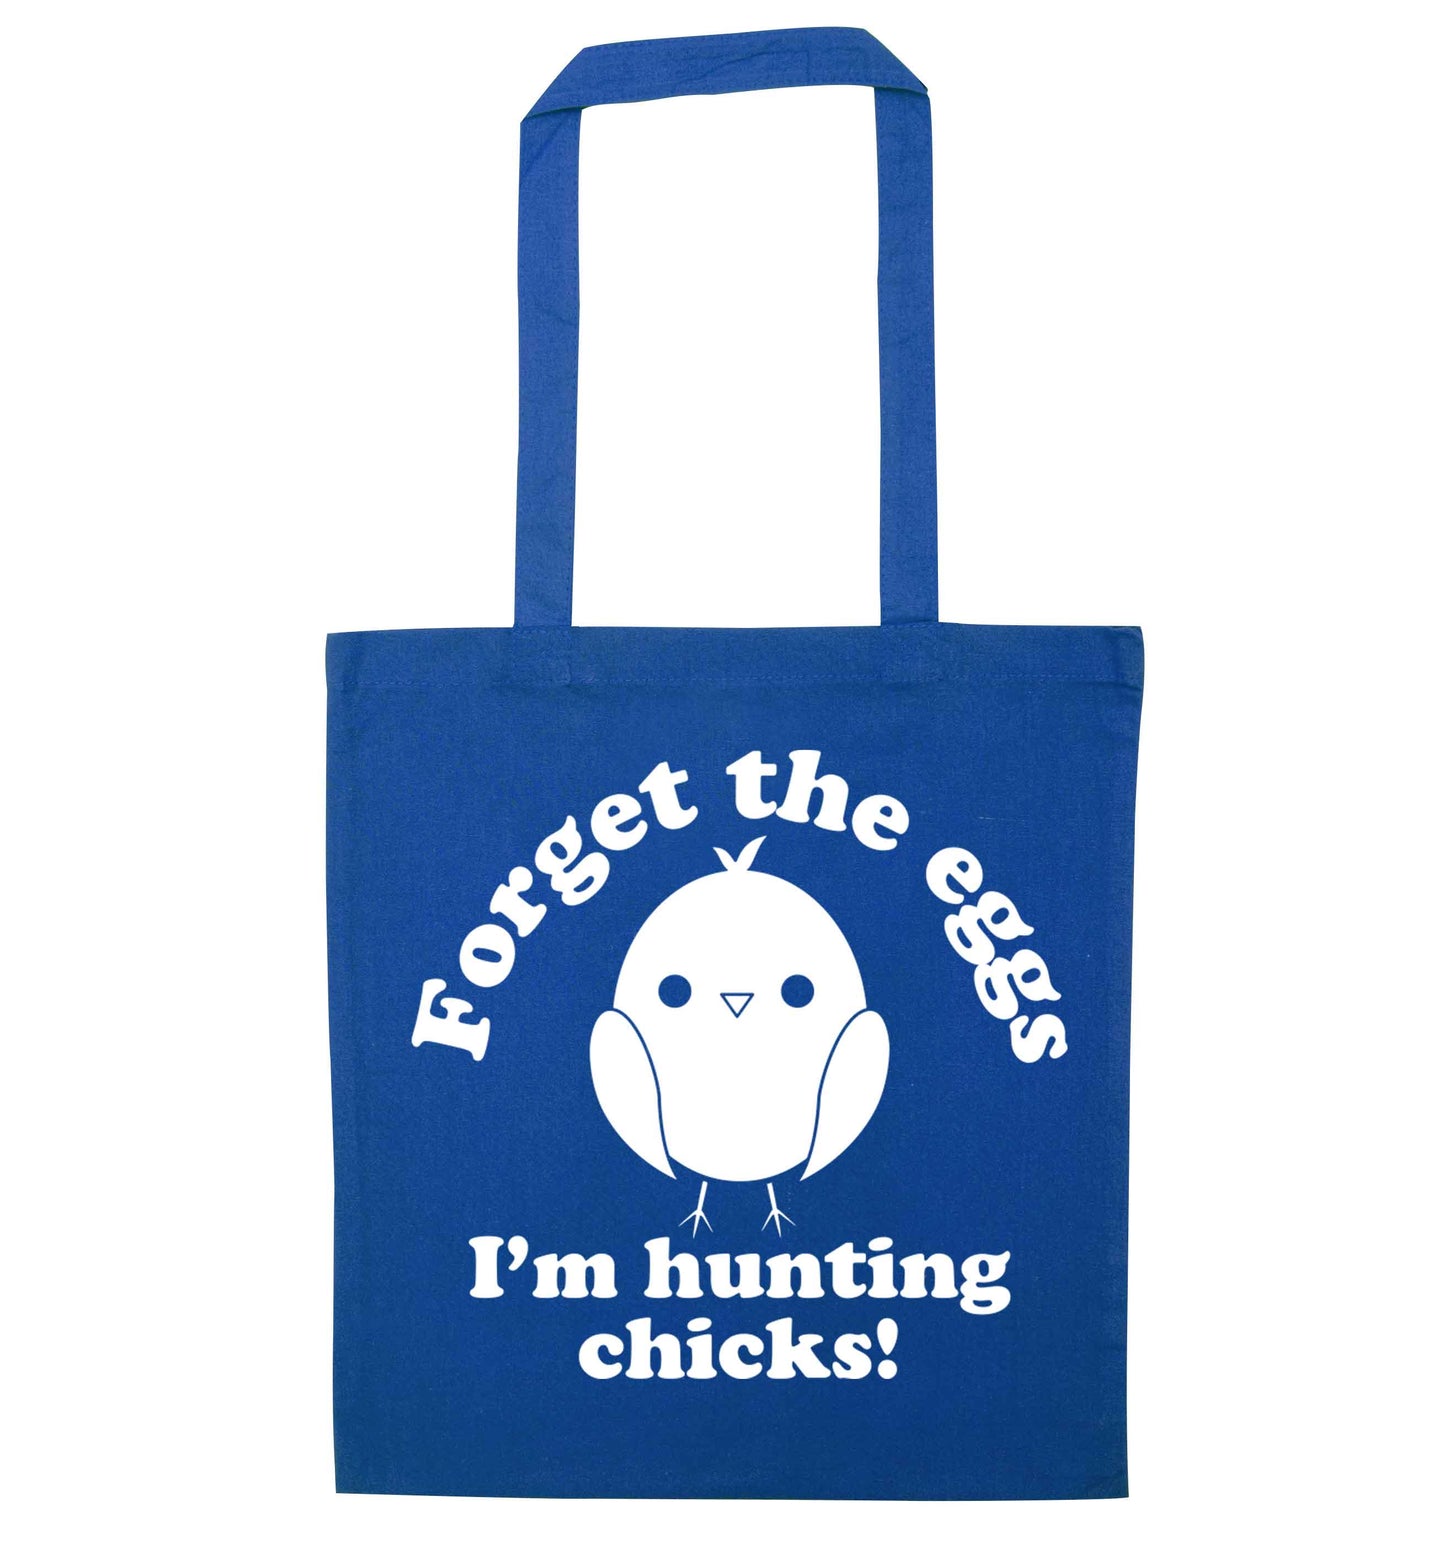 Forget the eggs I'm hunting chicks! blue tote bag